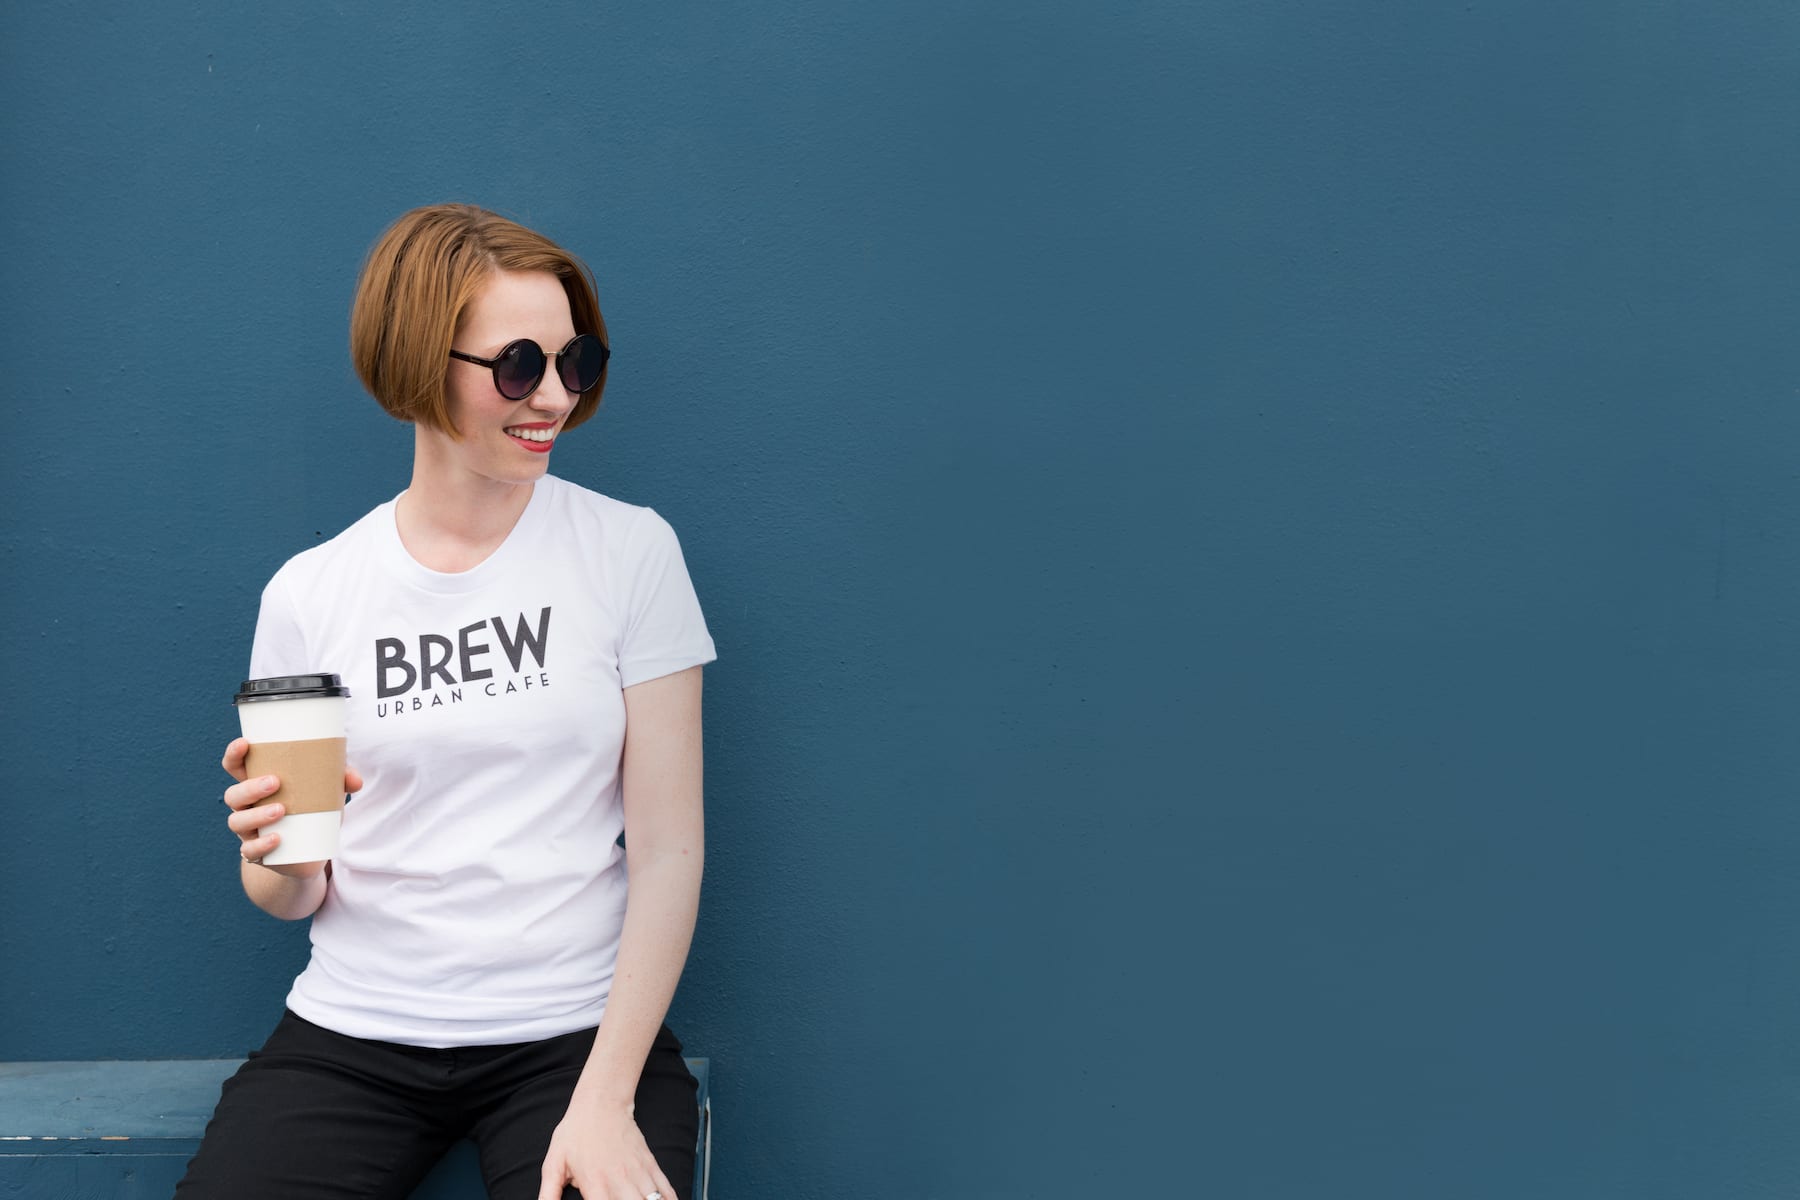 Brew Urban Cafe Woman with short hazel hair wearing sunglasses, white Brew Urban Cafe tshirt holding a drink smiling and posing for camera